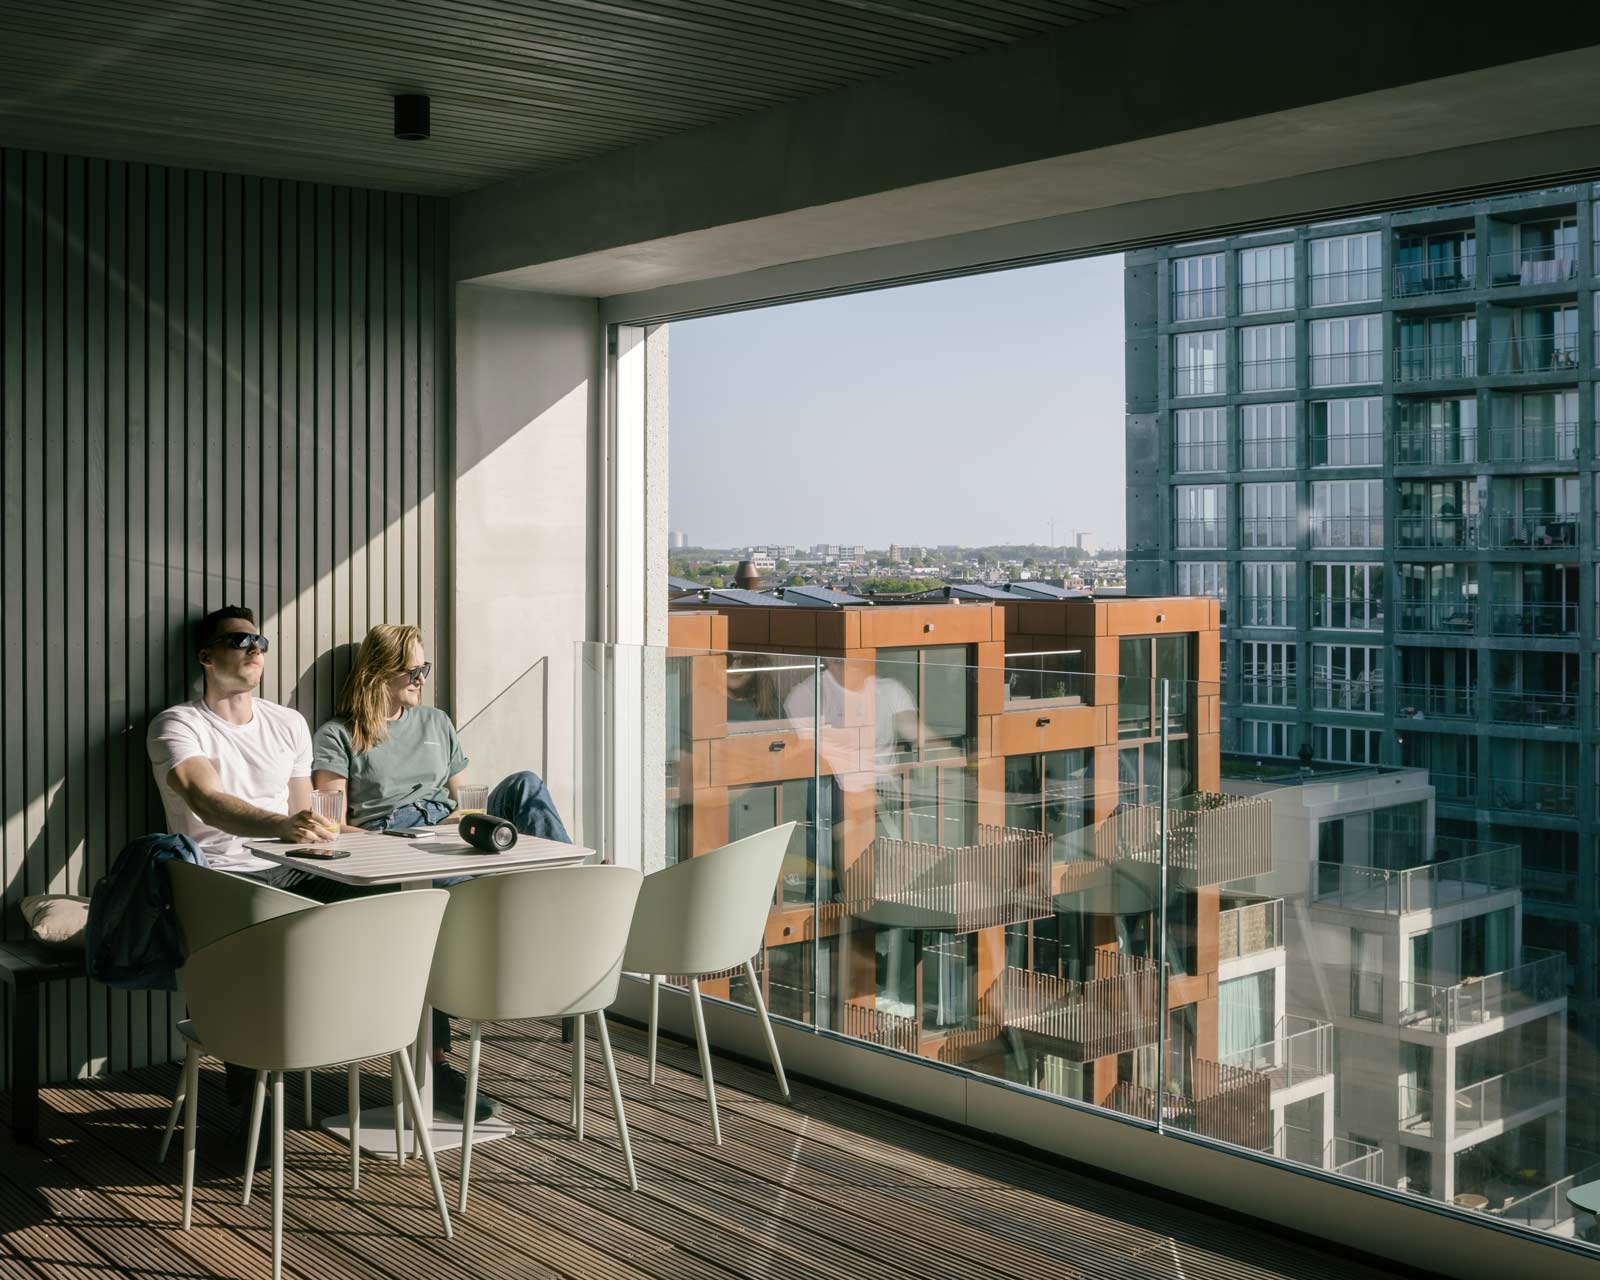 lobby 2 interior photo with couple sitting at a table of Oostenburg apartment block Draaier by BETA architect amsterdam evert klinkenberg gus auguste van oppen image by Stijn Bollaert